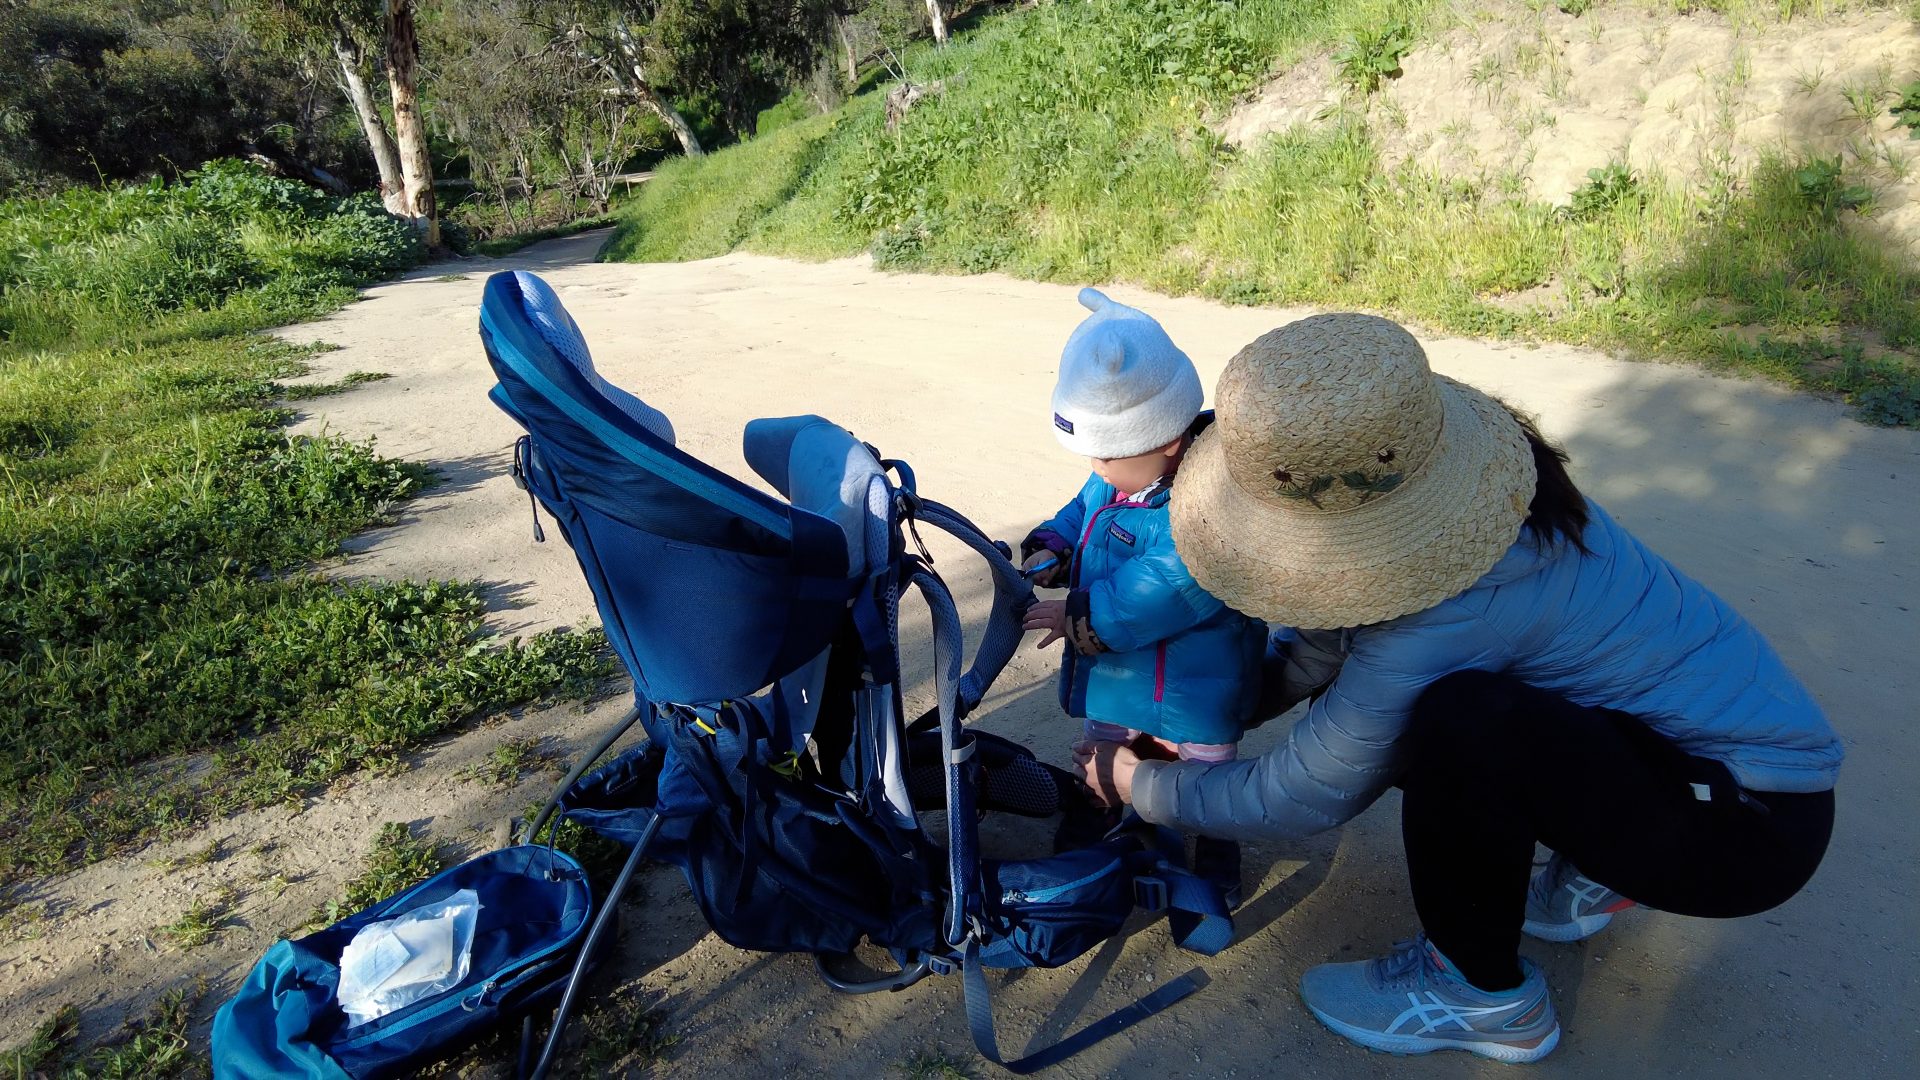 deuter pro baby carrier used for hiking with the baby